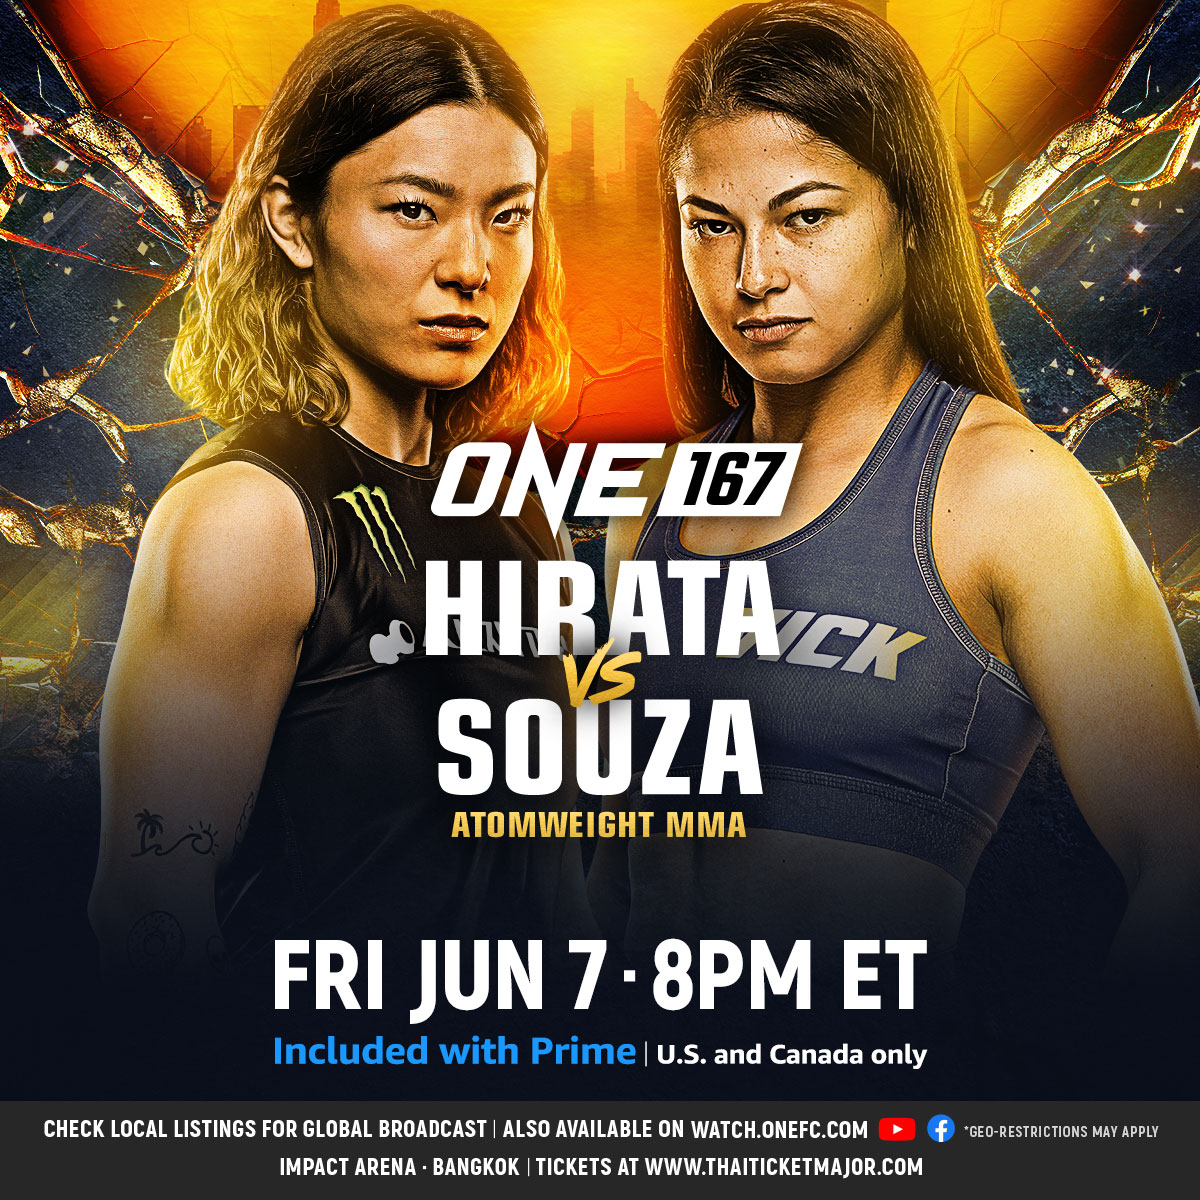 ANOTHER ONE 🚨 ONE 167 on @primevideo just added another banger as Japanese star Itsuki Hirata collides with Brazil’s Victoria Souza in an atomweight MMA showdown on June 7! 💥 #ONE167 | Jun 7 at 8PM ET 🇺🇸🇨🇦 Watch Live on Prime 🇬🇧🇮🇪 Watch Live on Sky Sports 🌍 Live TV broadcast